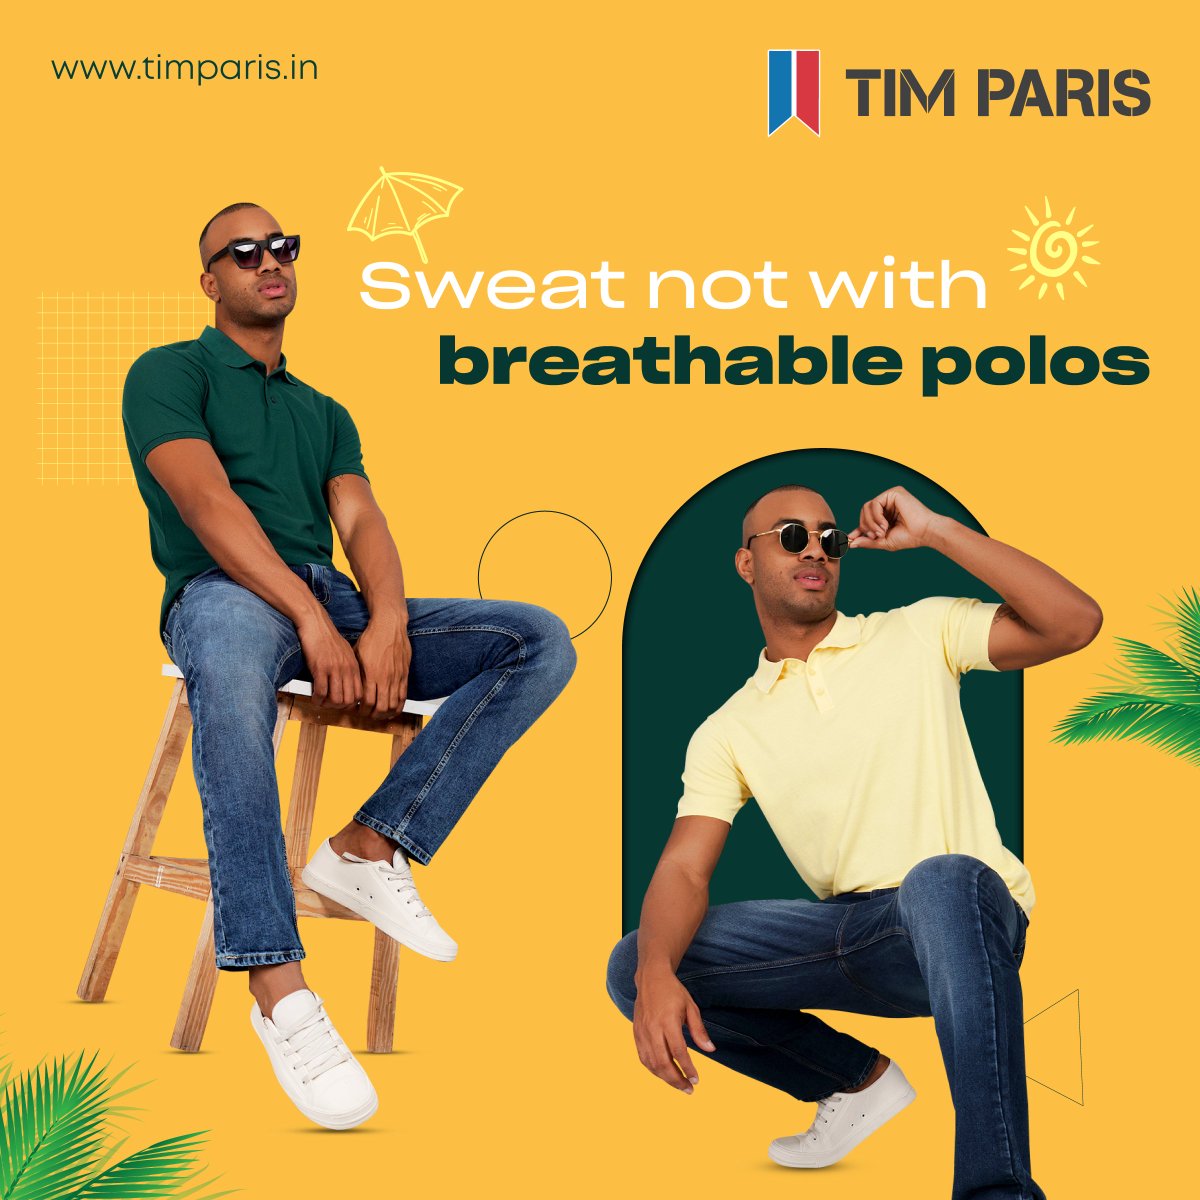 Sweat not! Stay cool and #Stylish with #TimParis breathable #Polos. Elevate your comfort and style this season.

Shop Now: timparis.in

#Polotshirt #MensFashion #CasualOutfit #MensClothing #SummeCollection #SummerSale #Tshirts #MenClothing #MenClothingStore